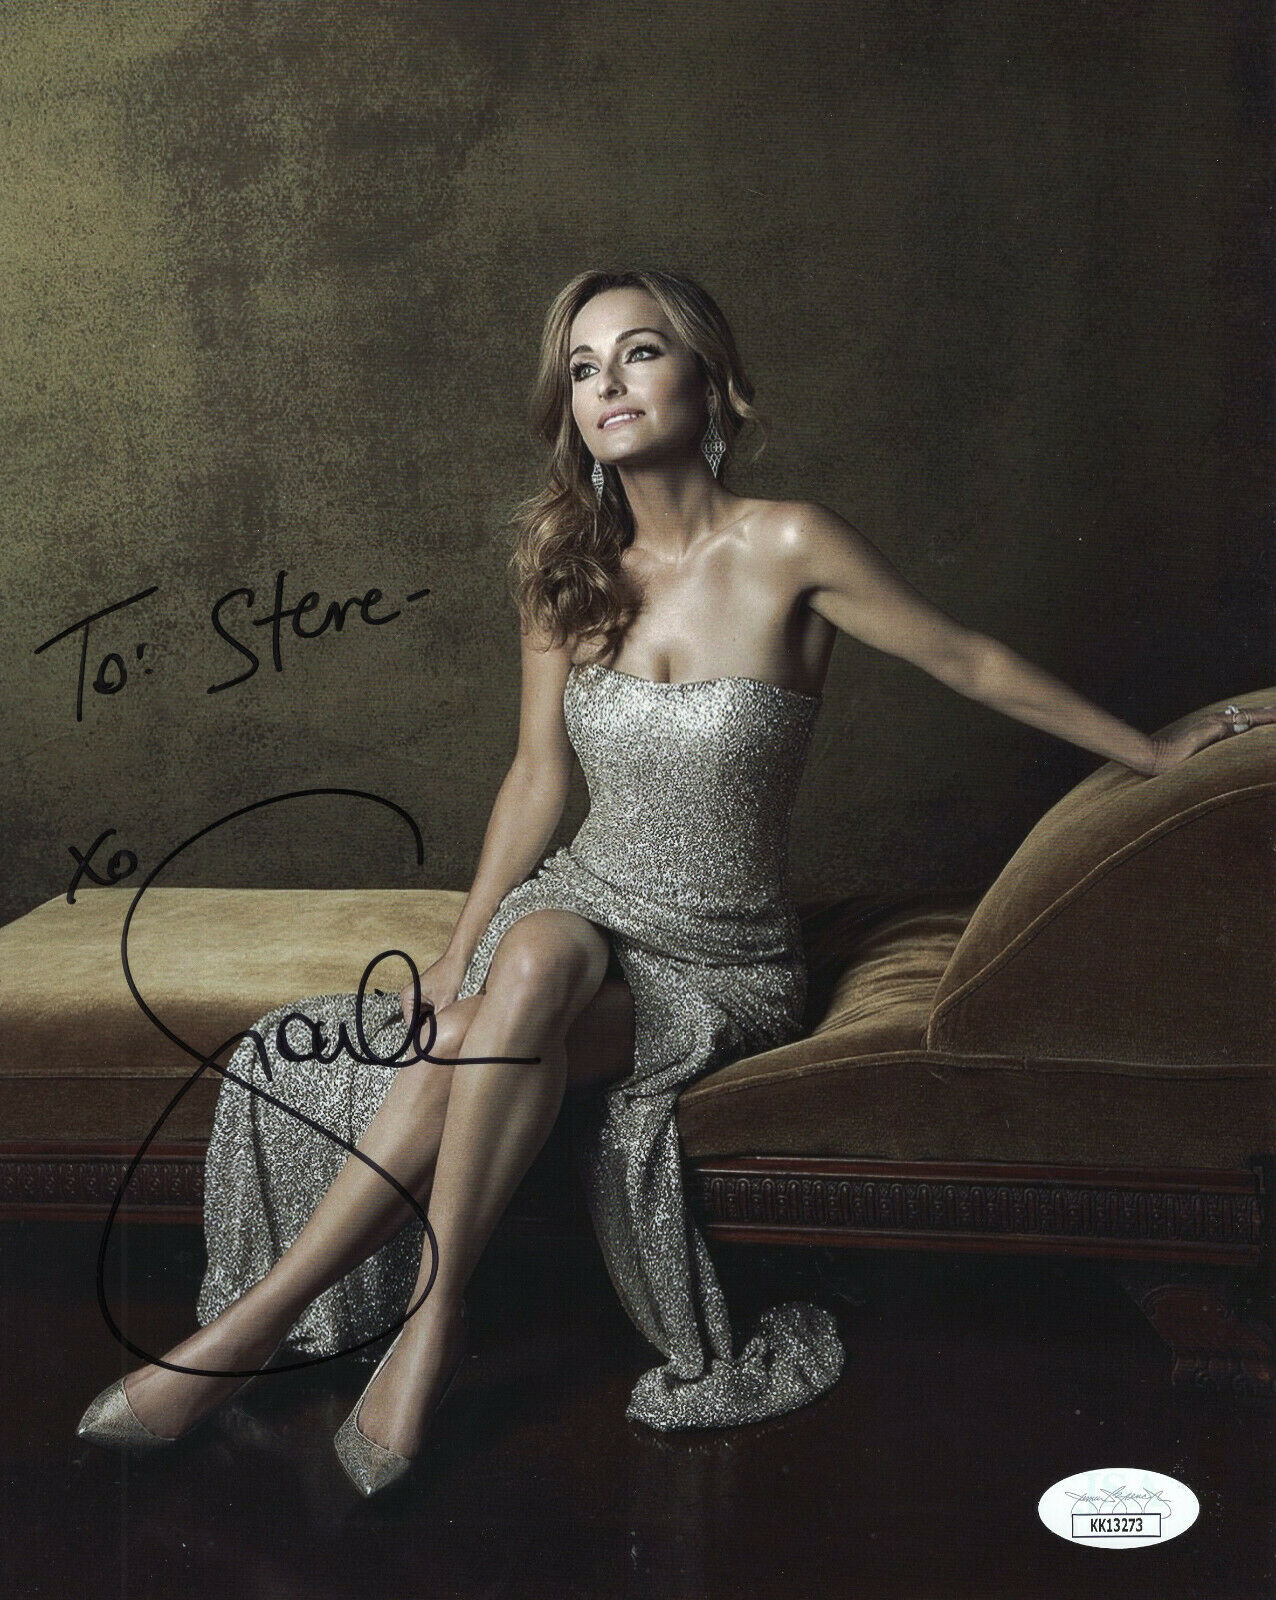 Sexy pictures of giada